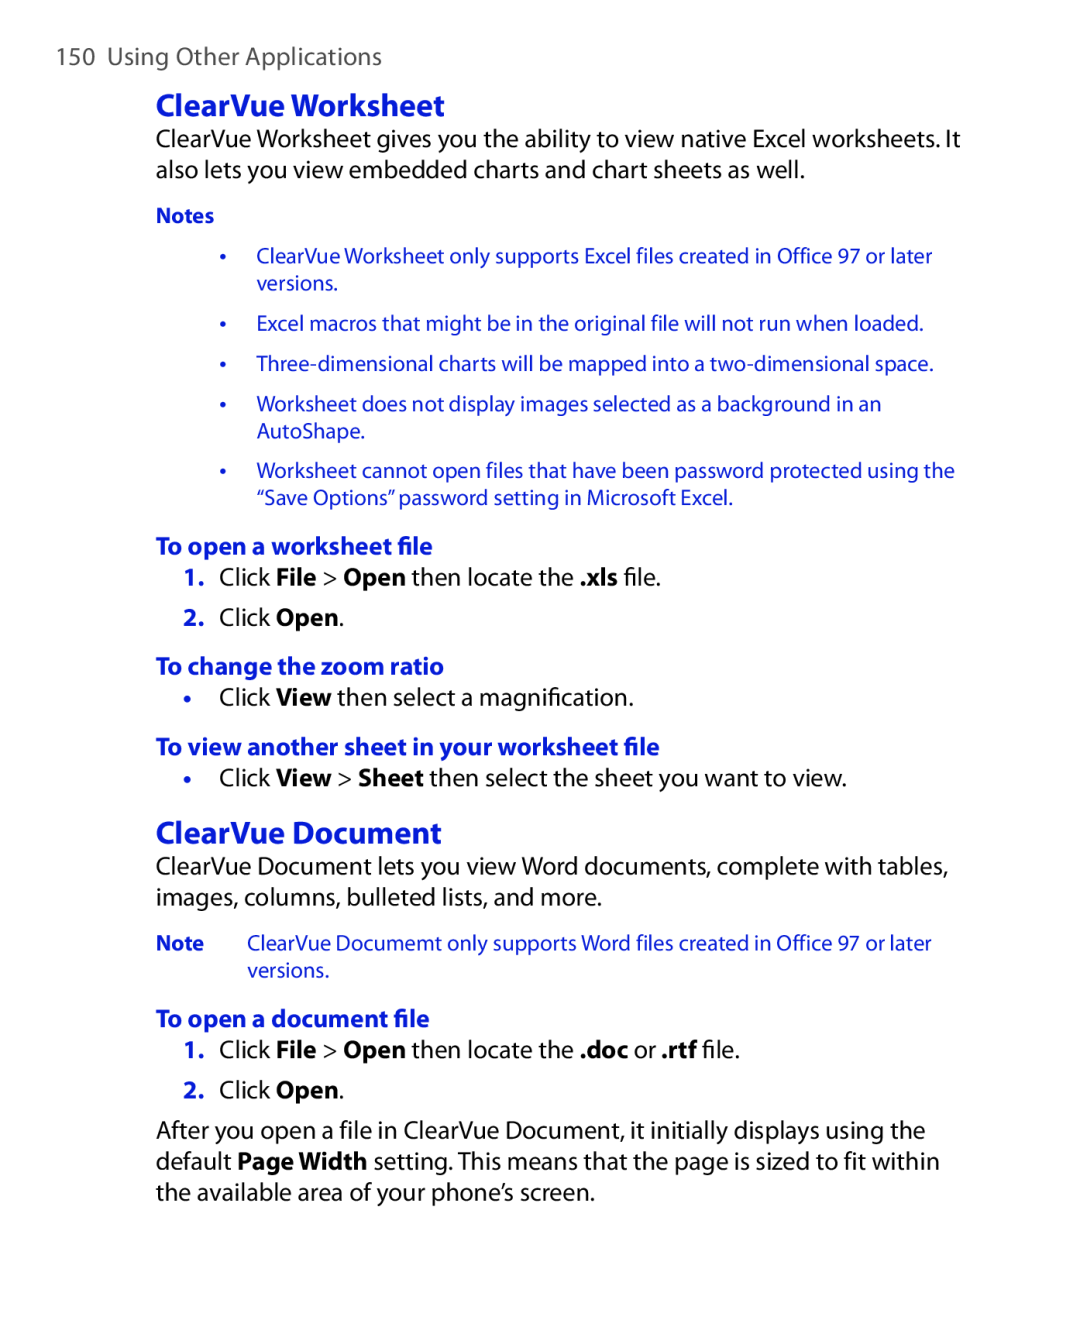 HTC HTC S621 user manual ClearVue Worksheet, ClearVue Document, Using Other Applications, To open a worksheet ﬁle 